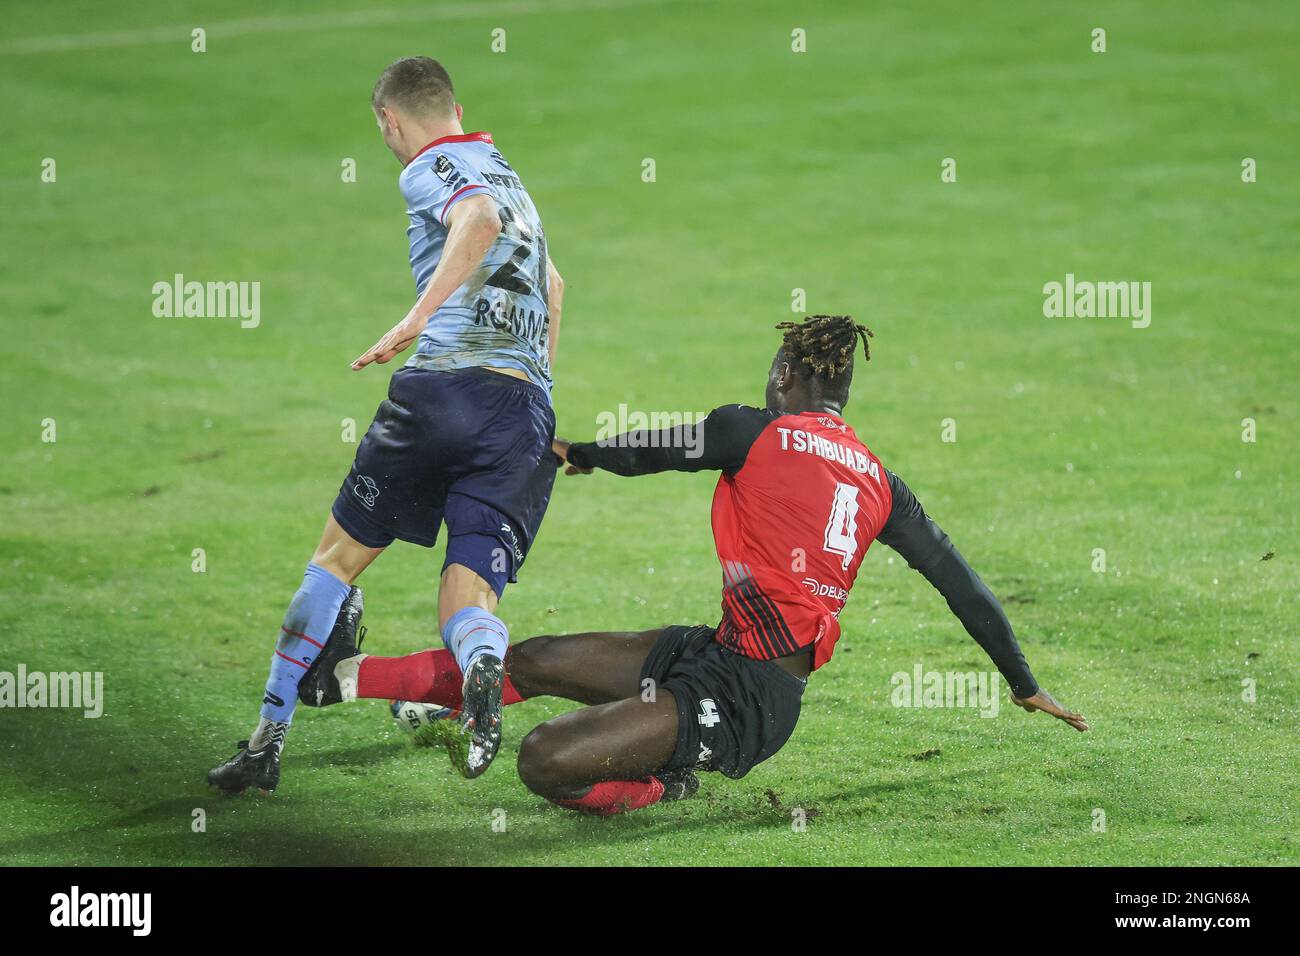 Essevee's Nicolas Rommens and Seraing's Marvin Silver Tshibuabua fight for the ball during a soccer match between RFC Seraing and SV Zulte Waregem, Saturday 18 February 2023 in Seraing, on day 26 of the 2022-2023 'Jupiler Pro League' first division of the Belgian championship. BELGA PHOTO BRUNO FAHY Stock Photo